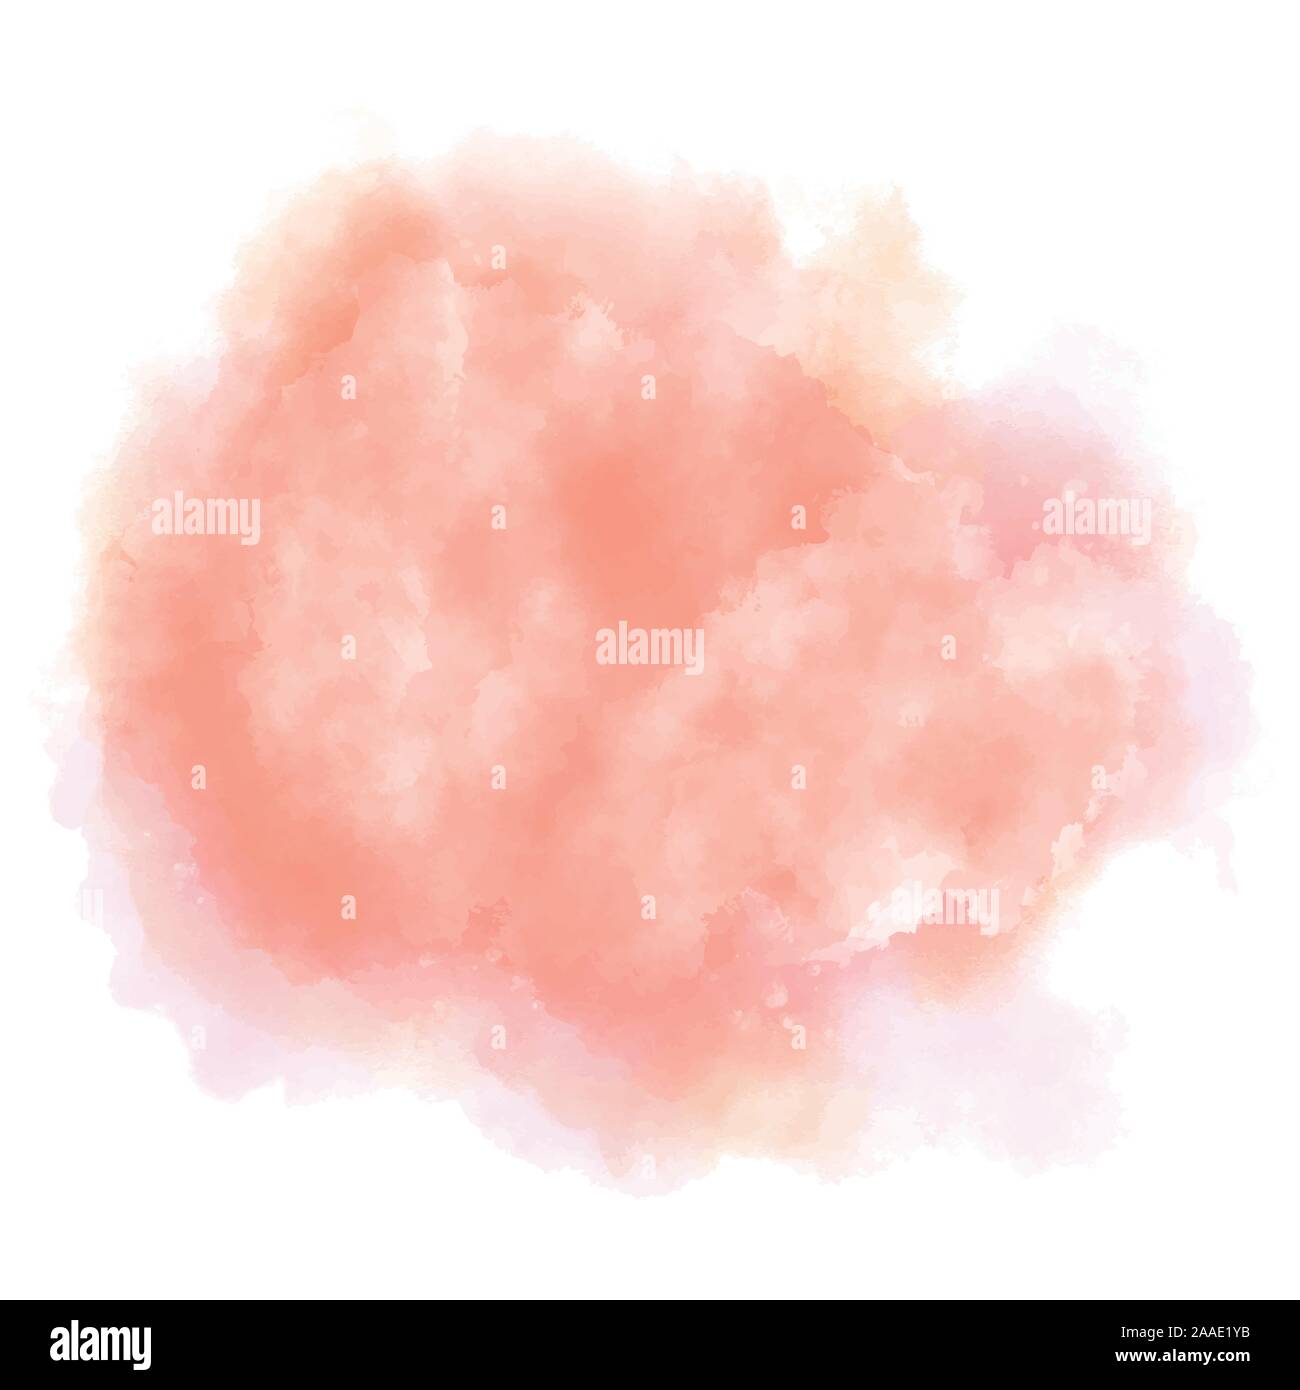 Watercolor Background. Red, orange and pink paint splash on paper. Textured vector illustration. Brush stroke. Stock Vector